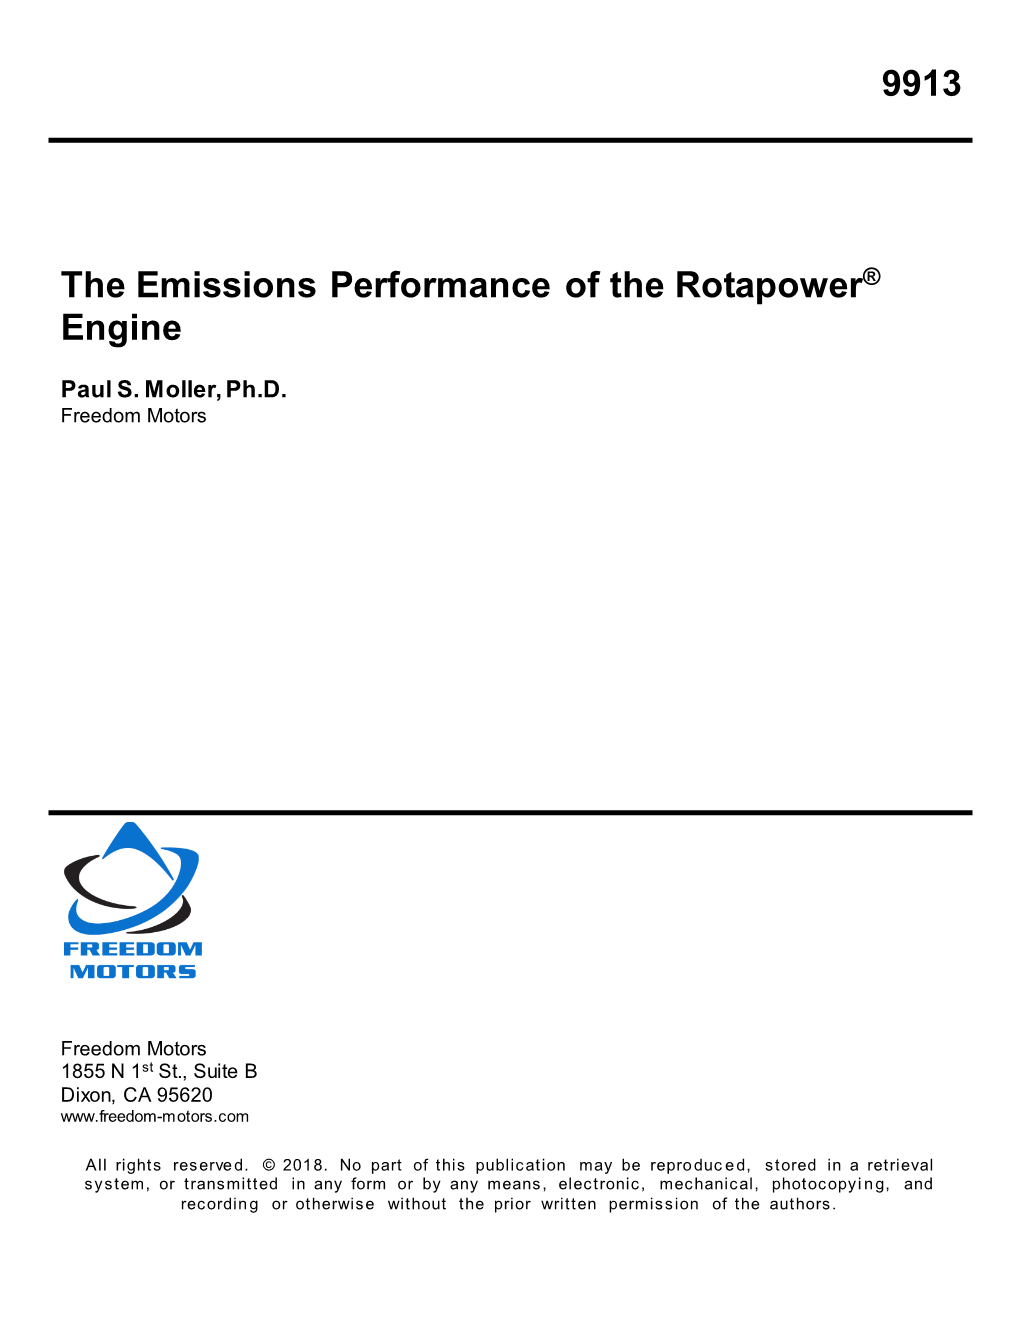 9913 the Emissions Performance of the Rotapower® Engine